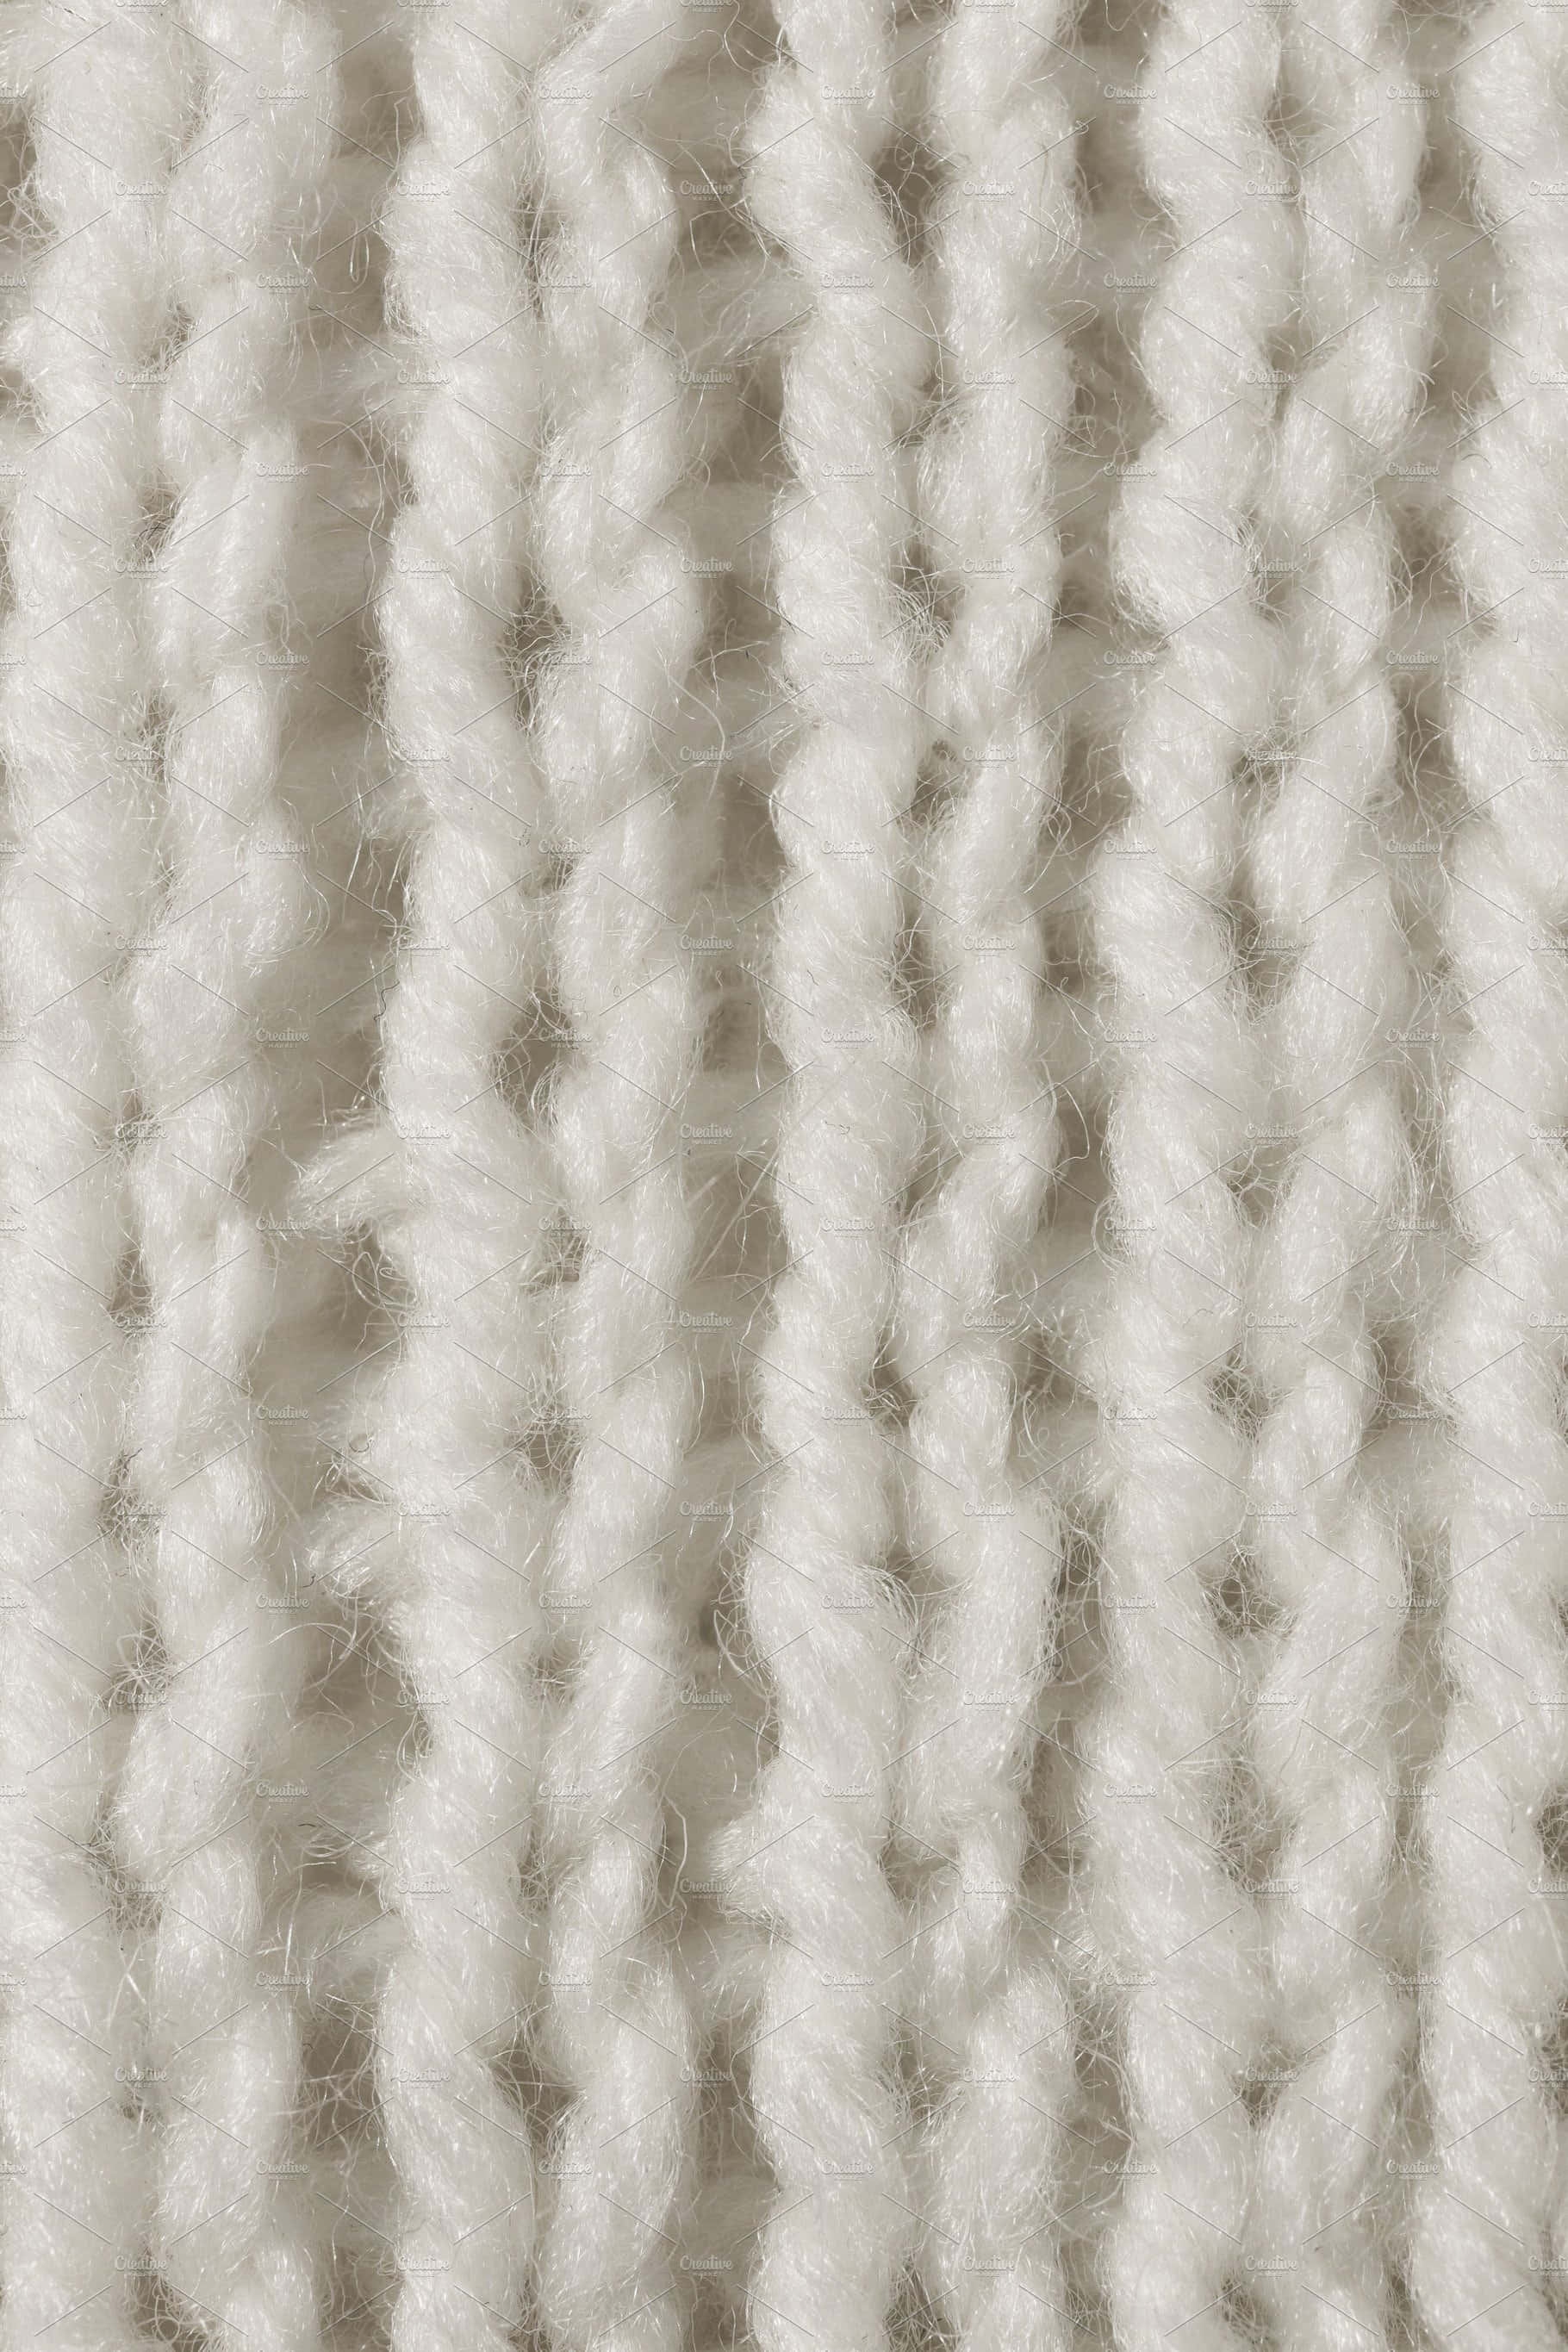 Warm And Cozy Knitted Wool Texture Wallpaper